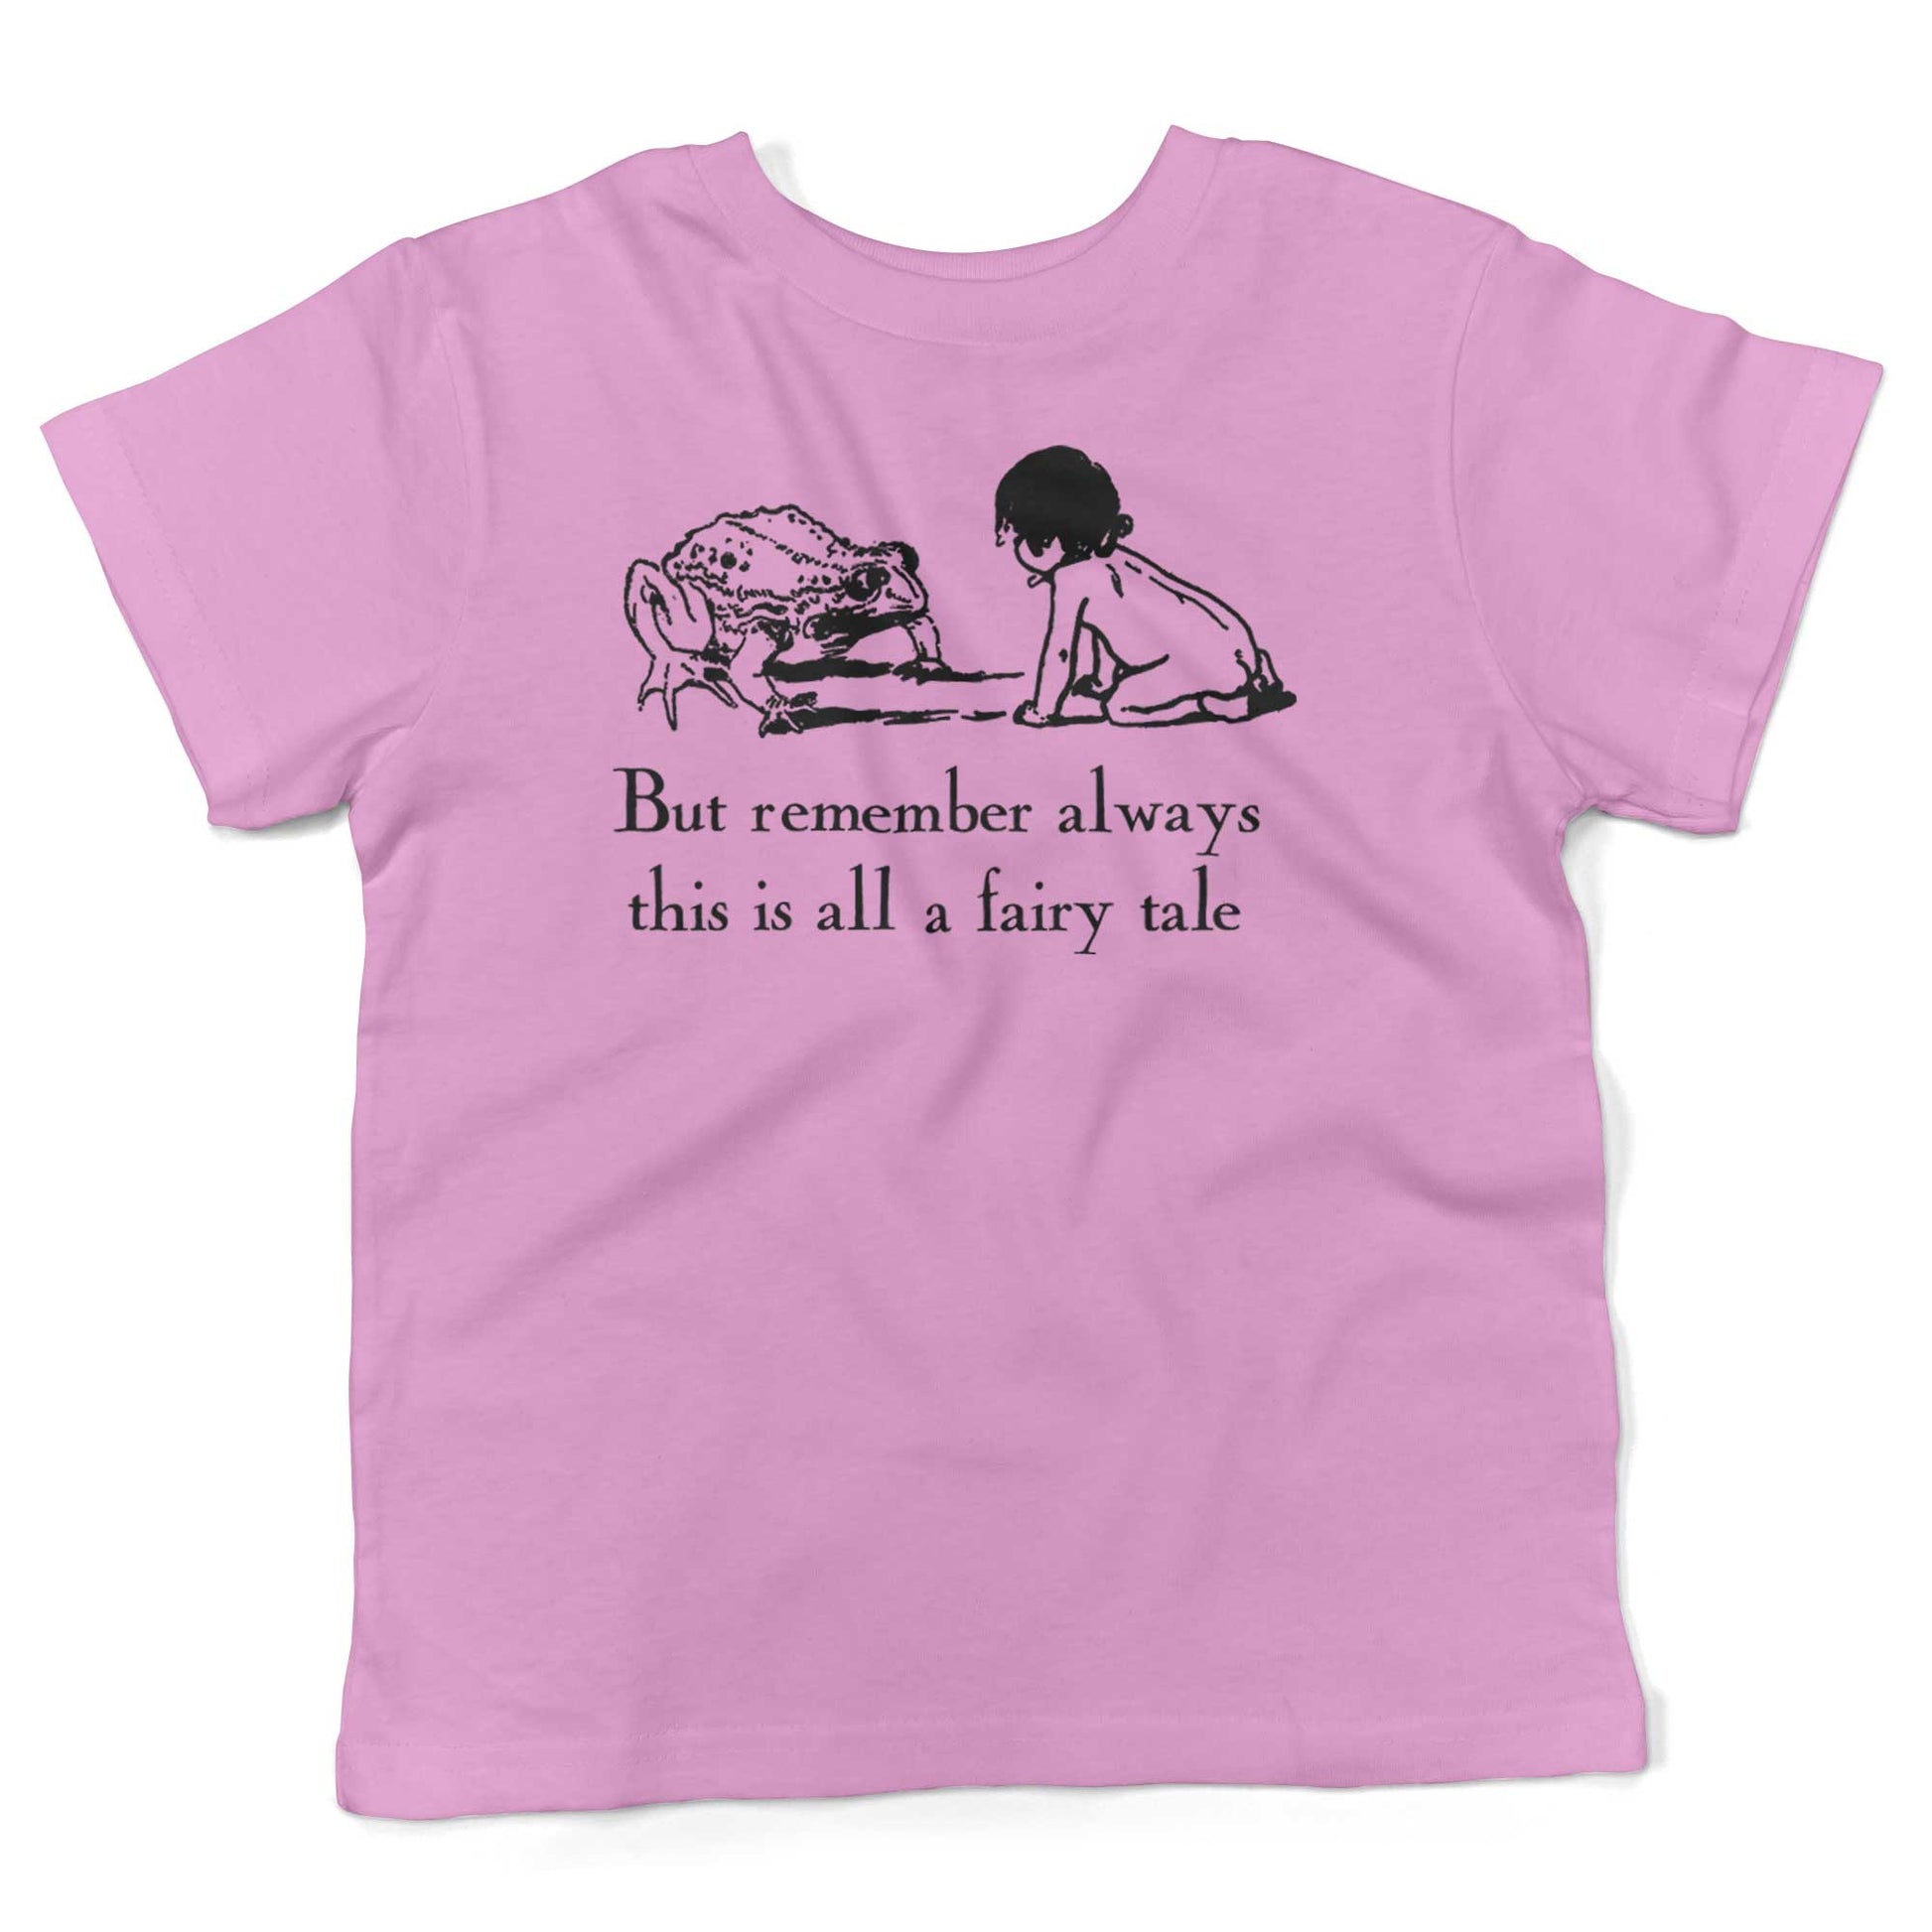 But remember always this is all a fairy tale Toddler Shirt-Organic Pink-2T